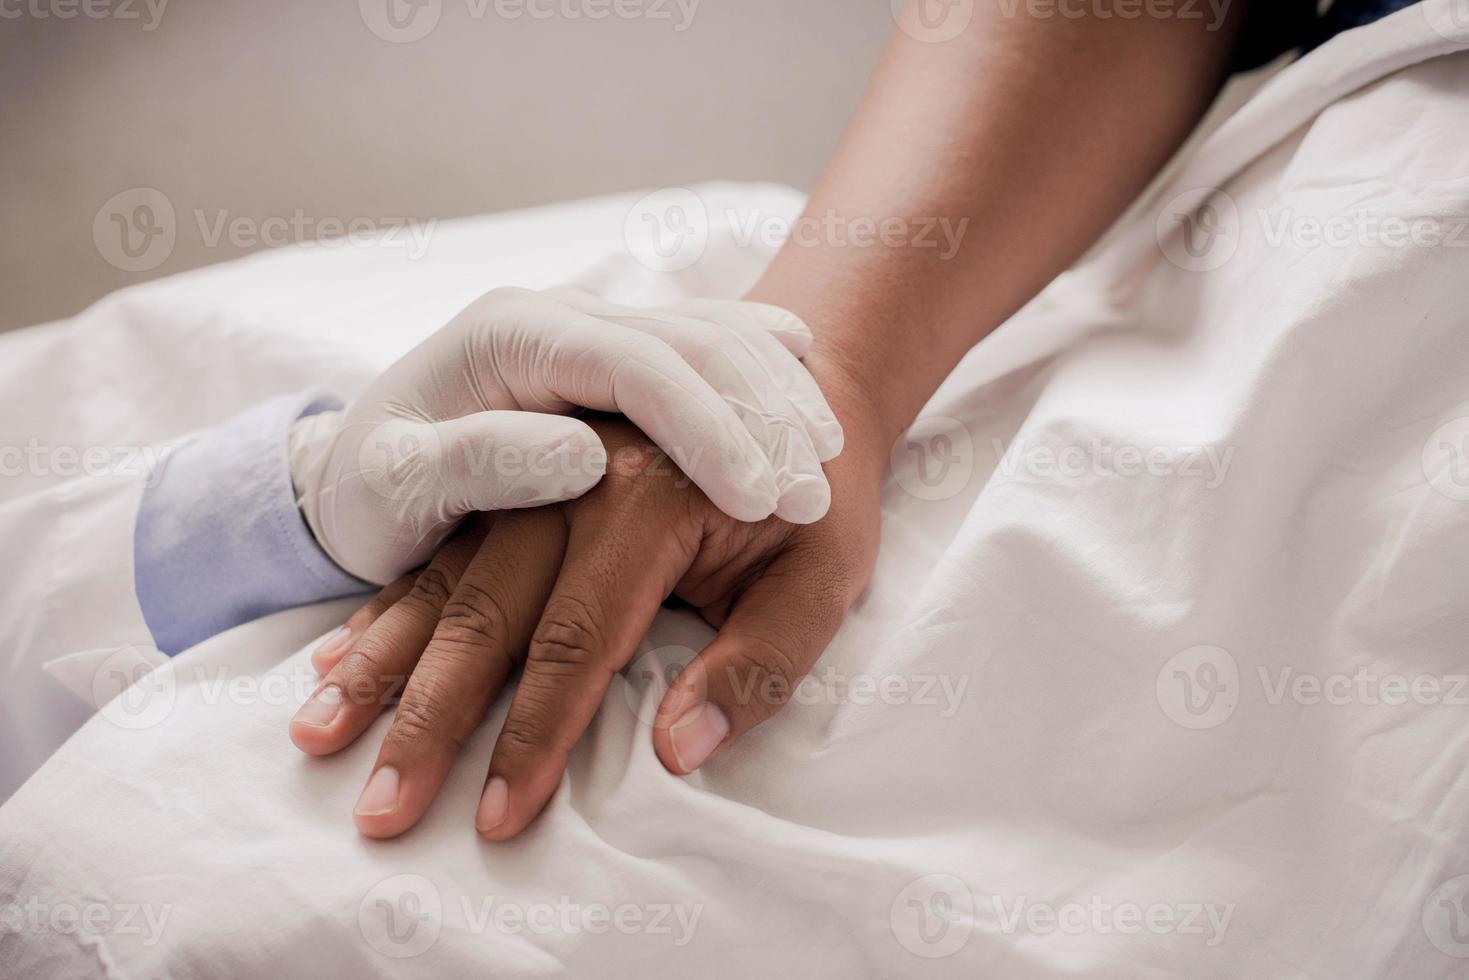 Hand of doctor reassuring her female patient care and support concept close up photo